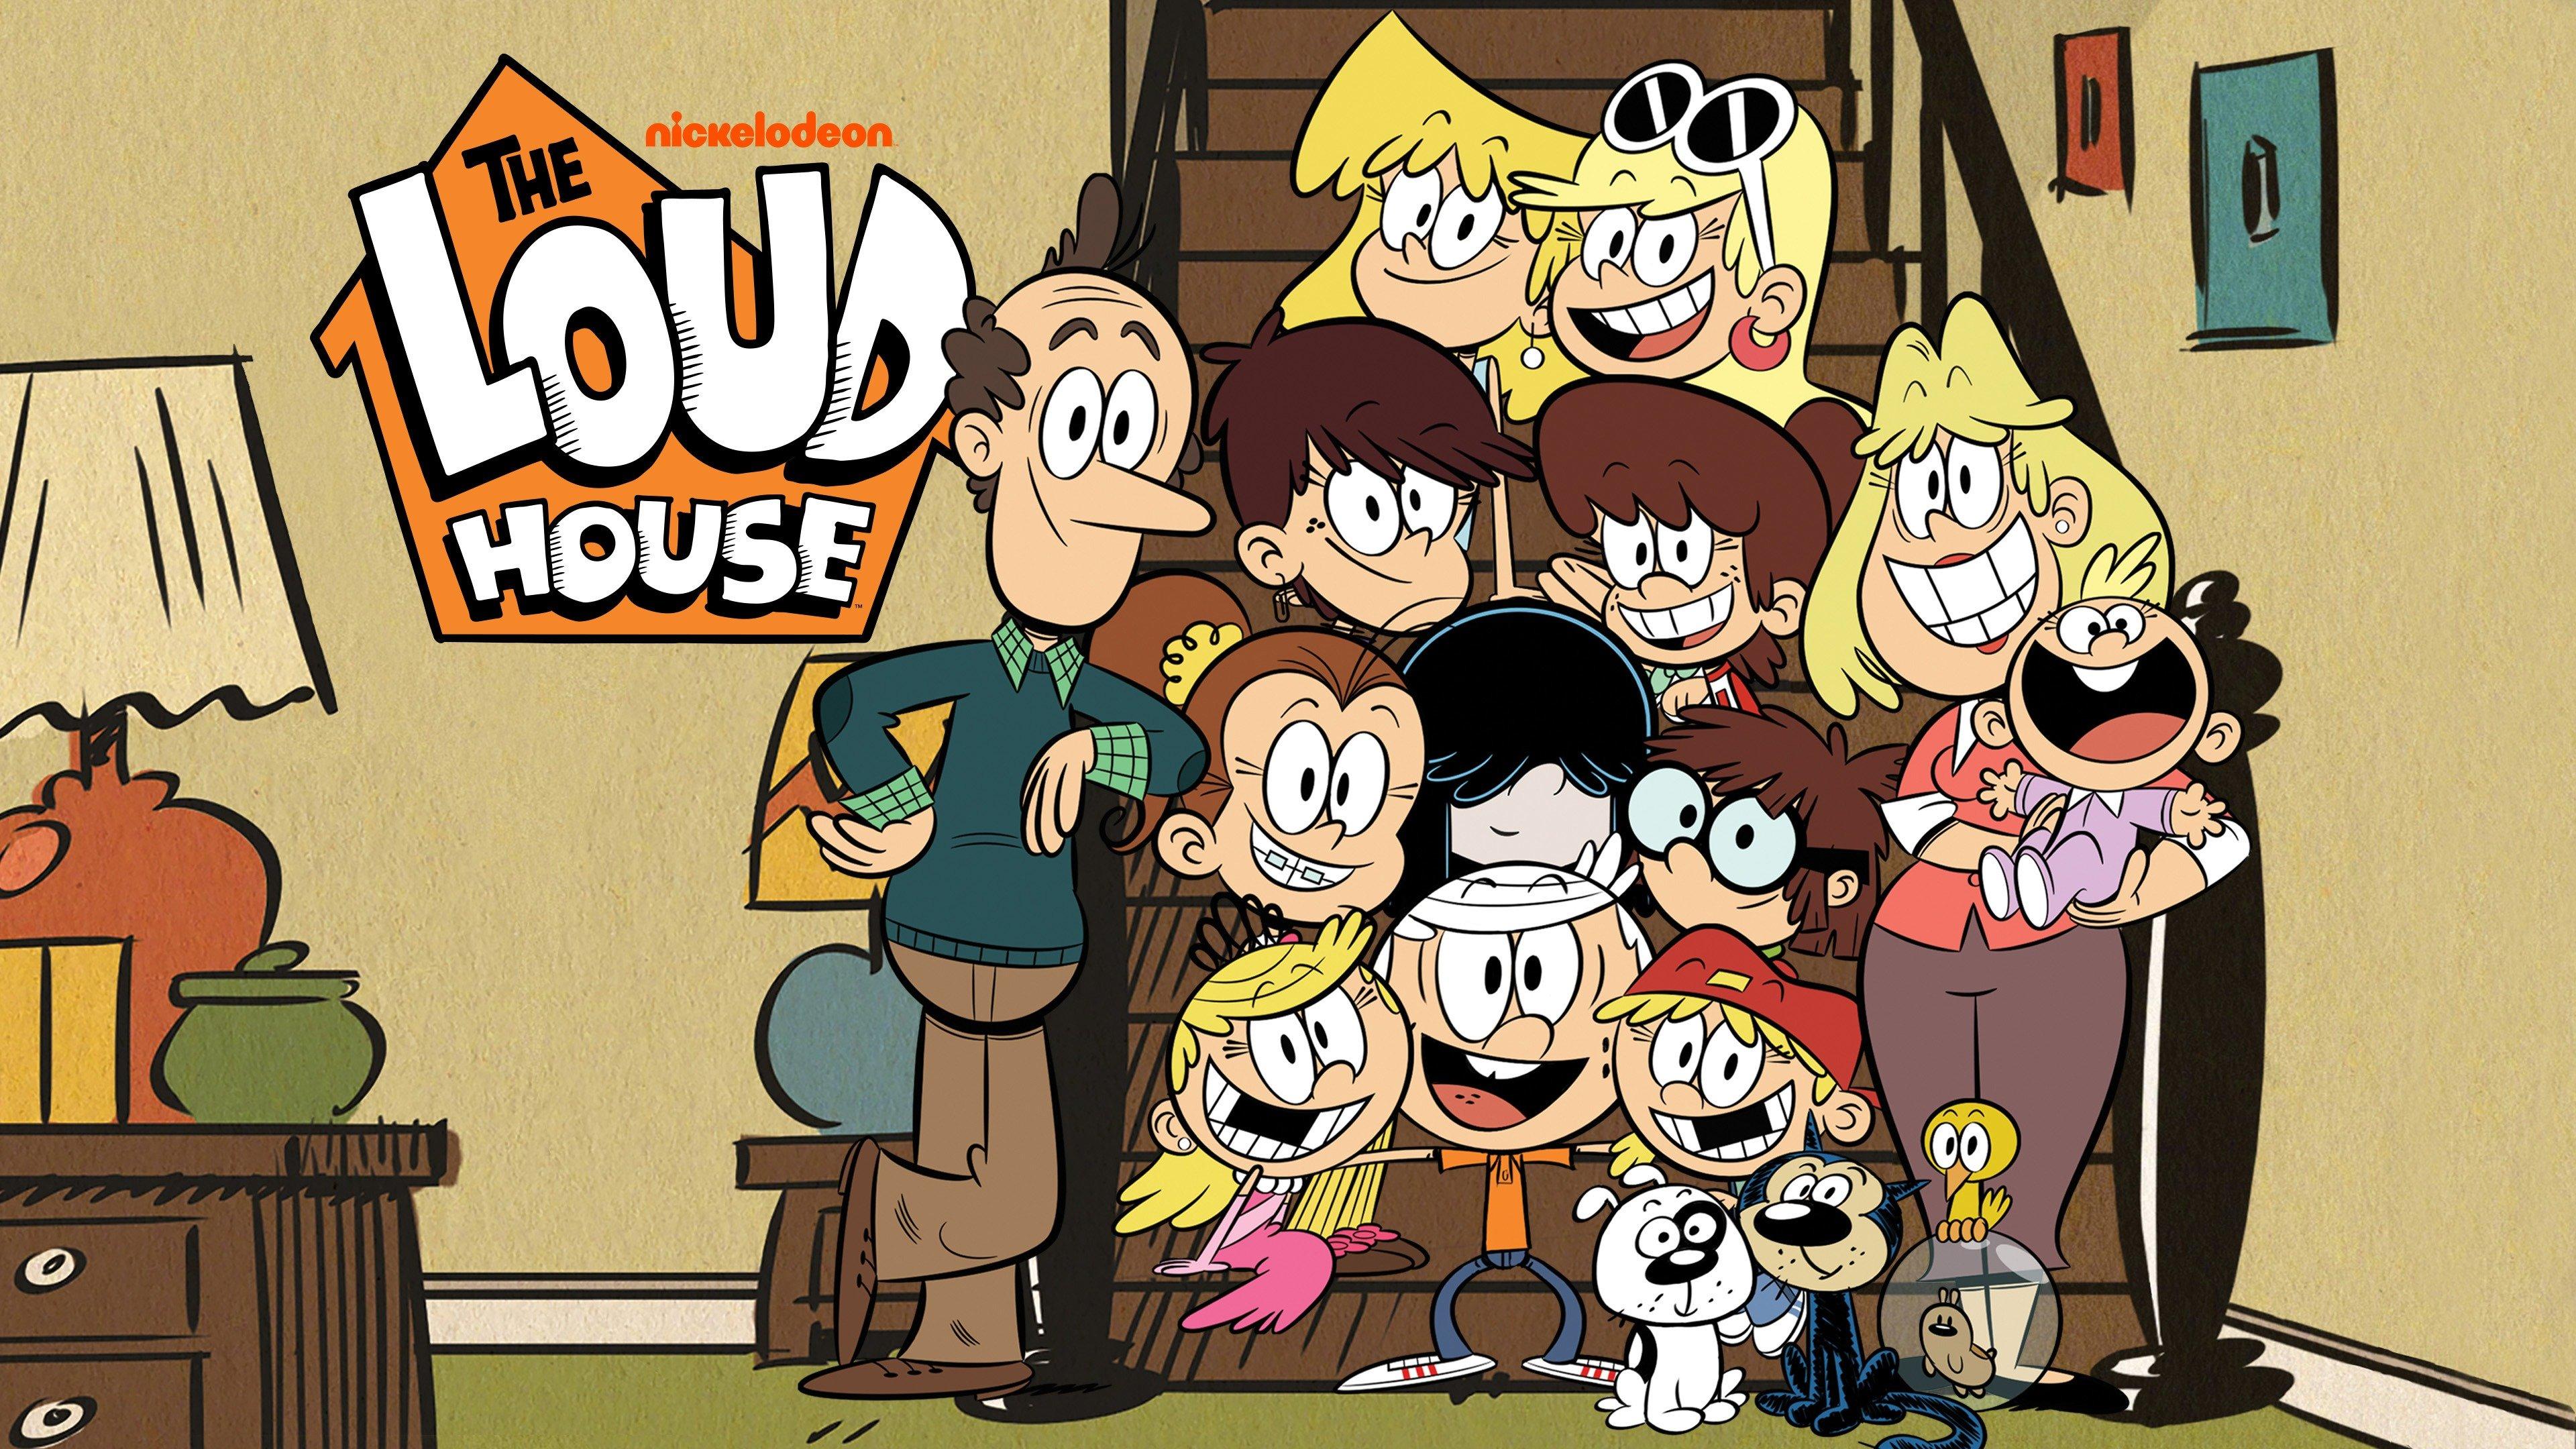 Where Can I Watch The Loud House? Episodes Online with Philo